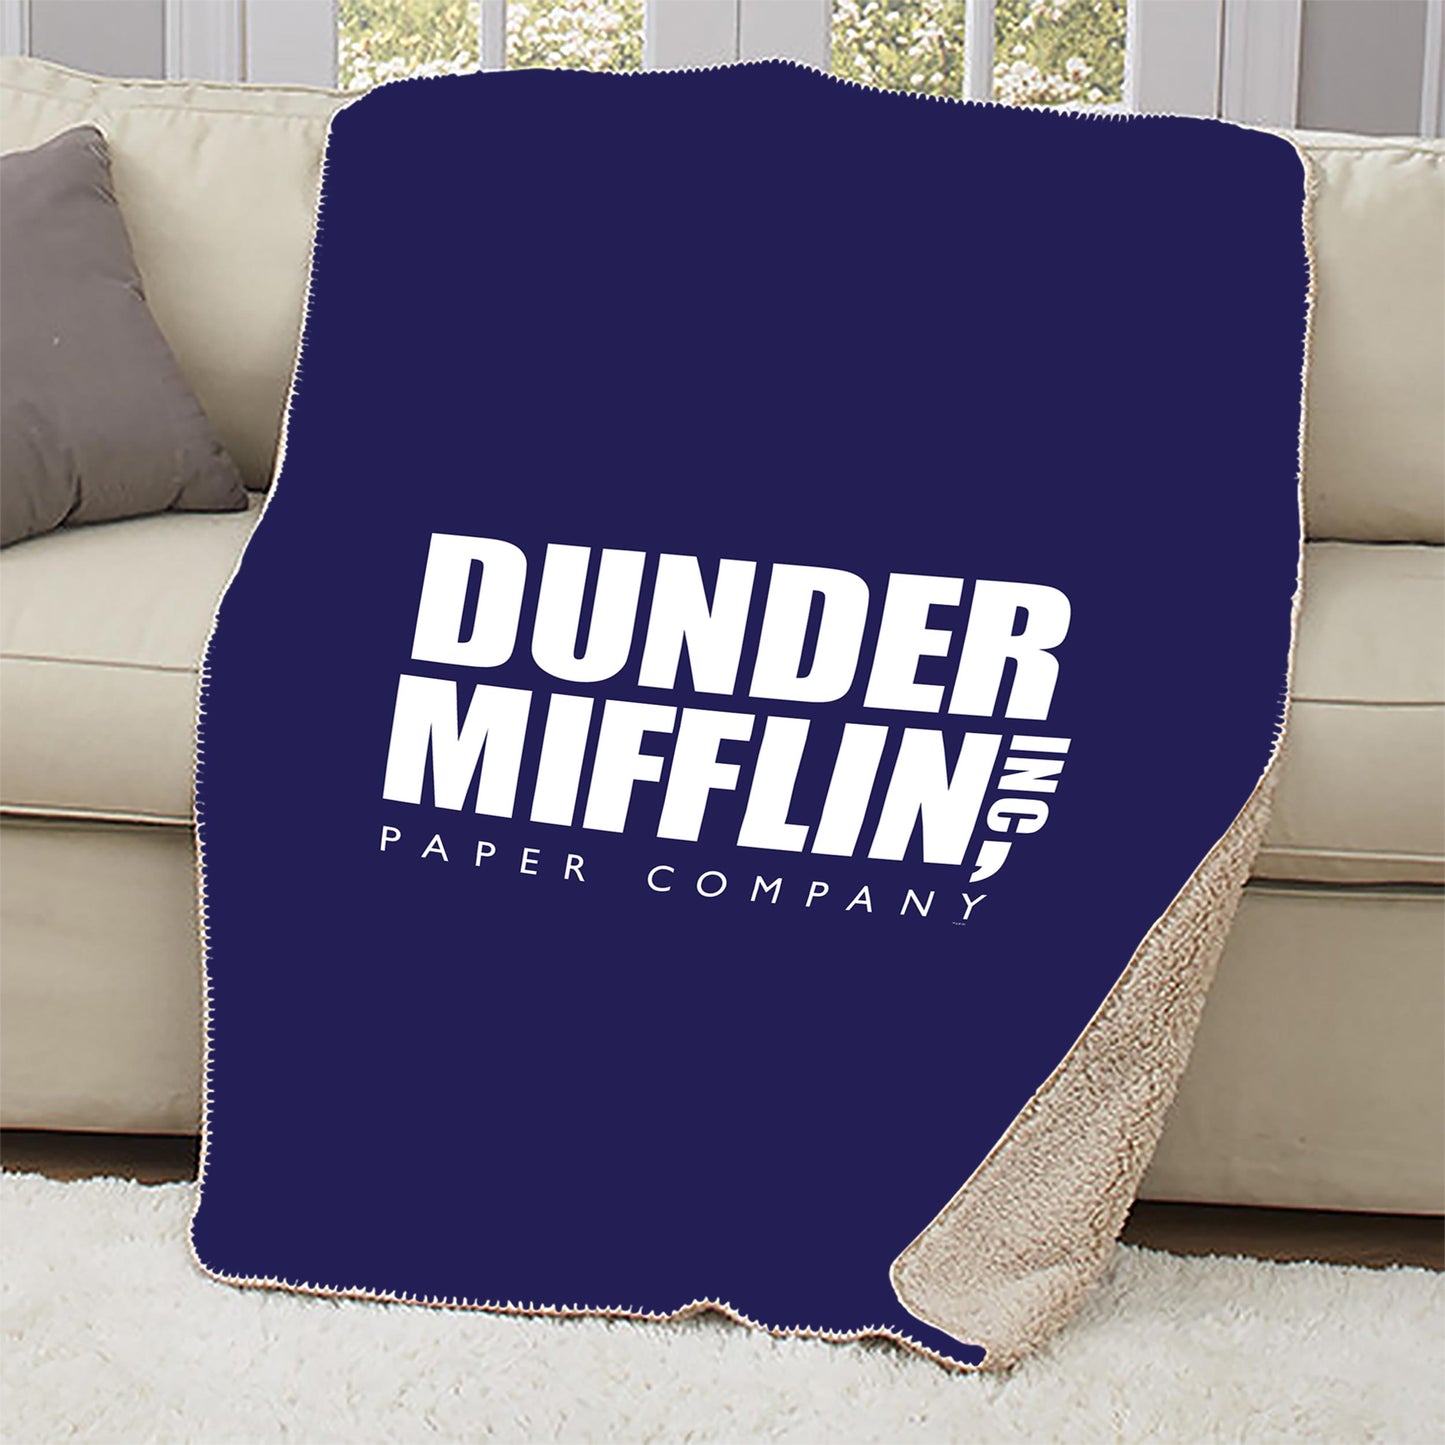 The Office Ultimate Fan Gift Wrapped Bundle